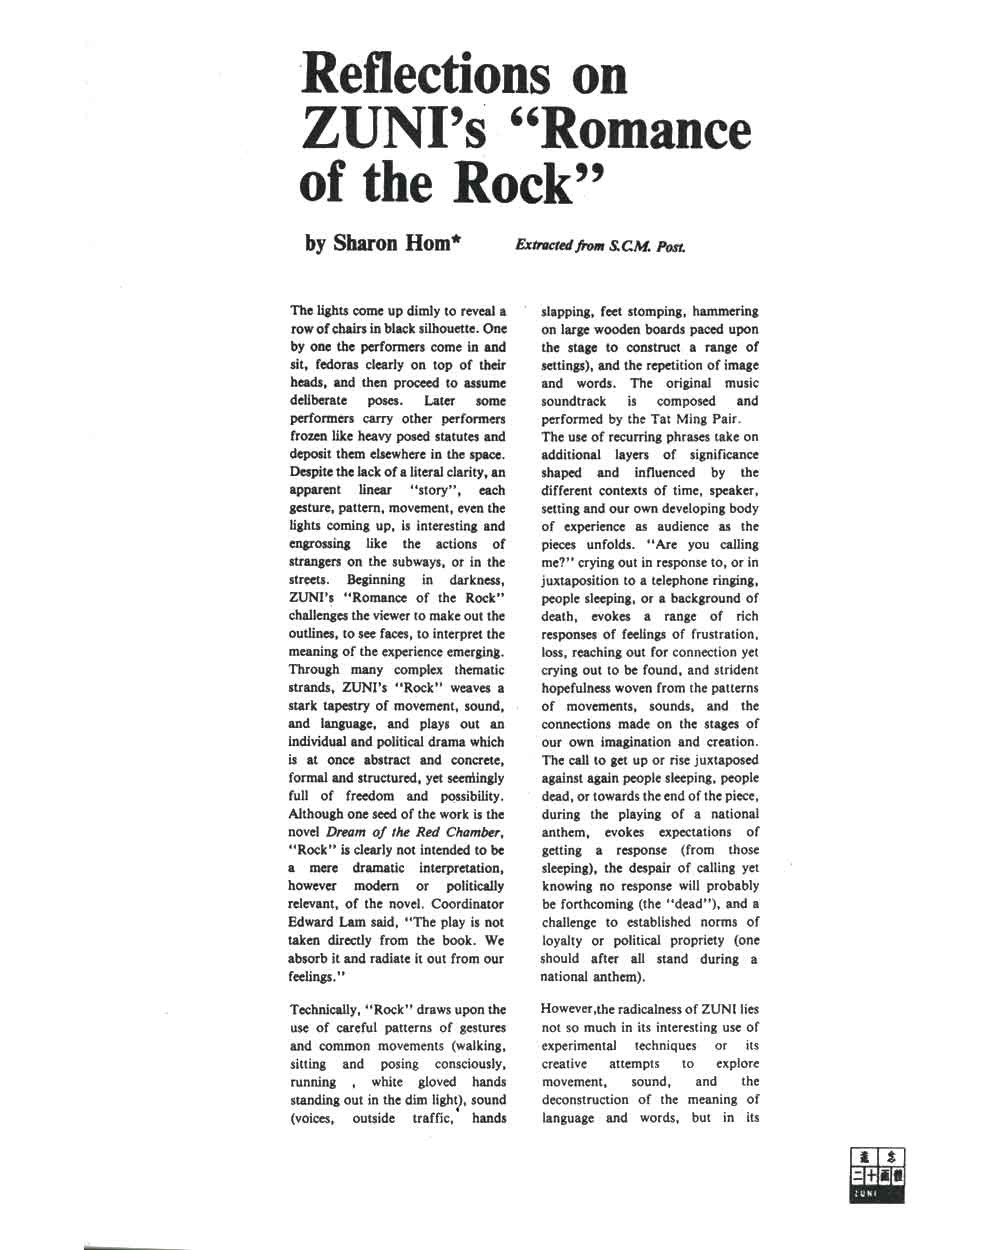 Reflections on ZUNI's 'Romance of the Rock', article, pg 1